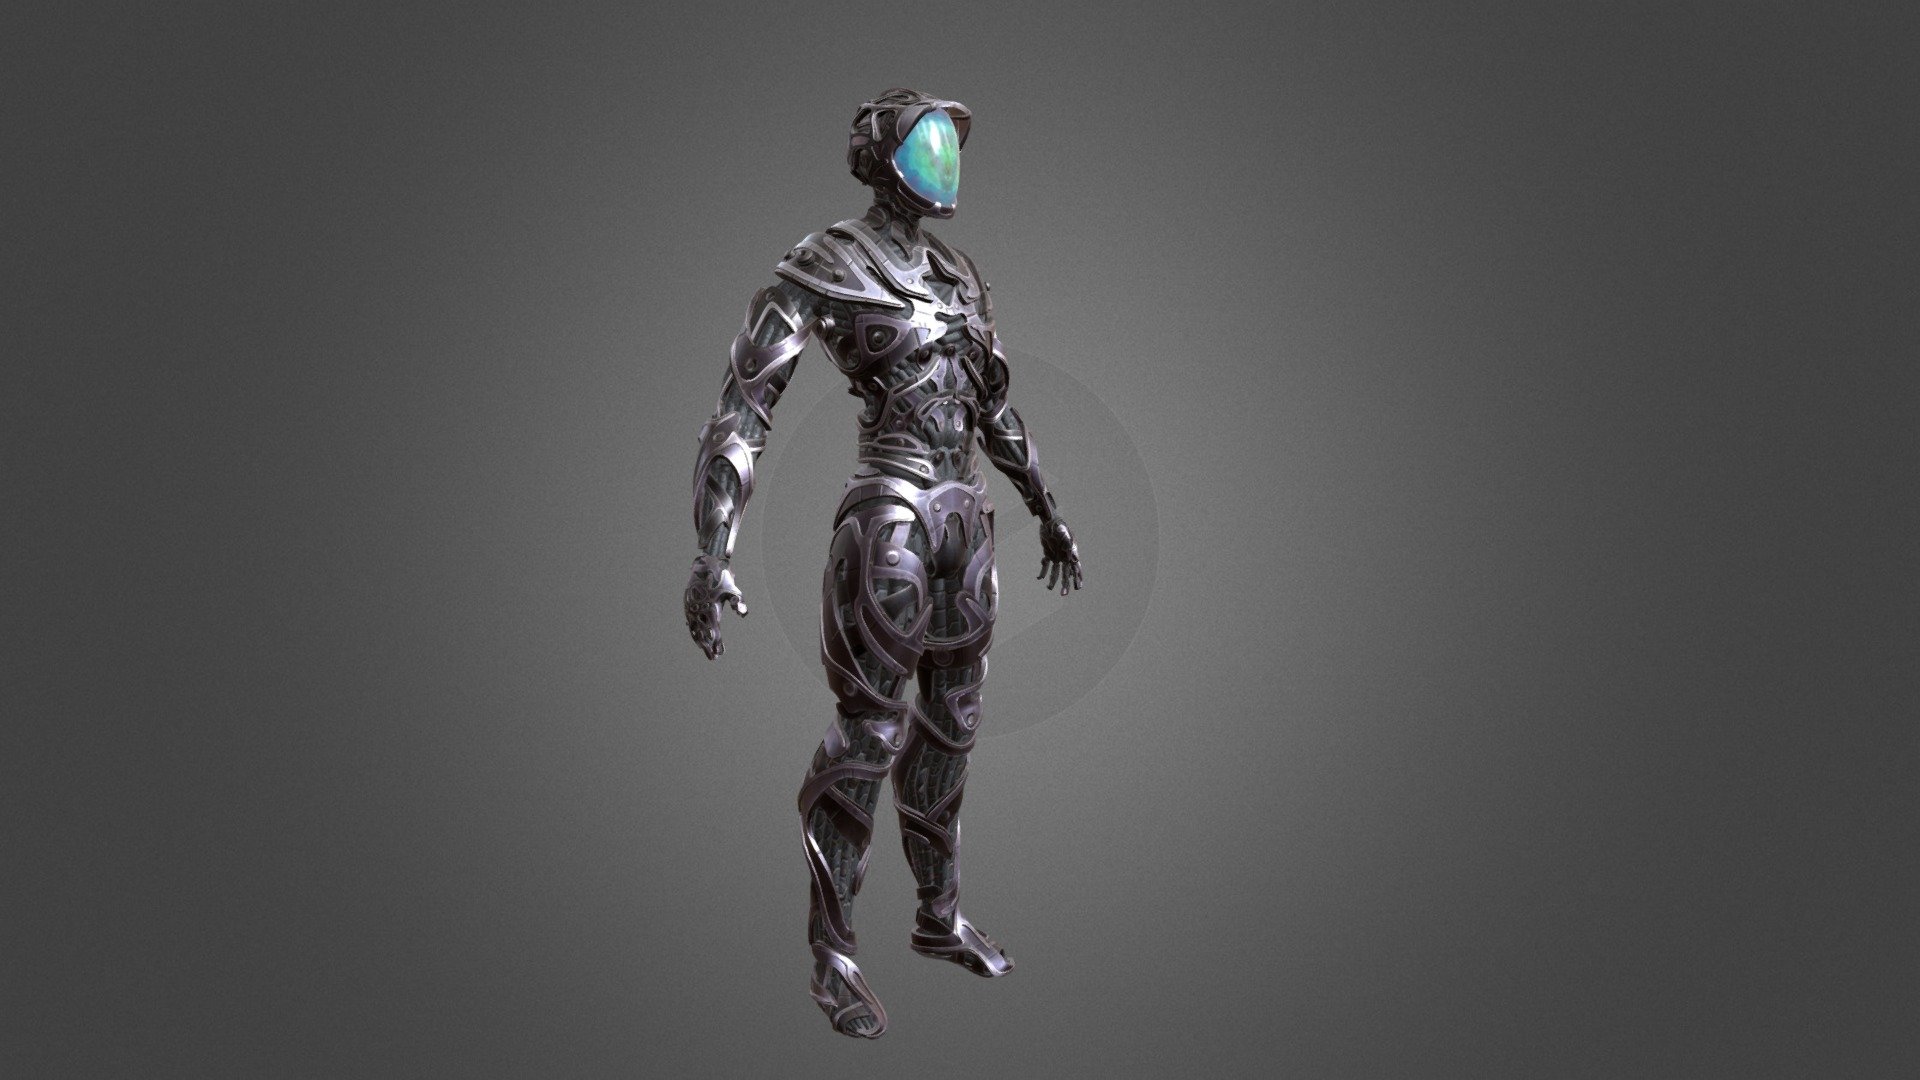 made using blender 
rig made using mixamo
materials are procedural
practicing hard-surface modelling using subd and solidify - robot character - 3D model by PhilStein 3d model